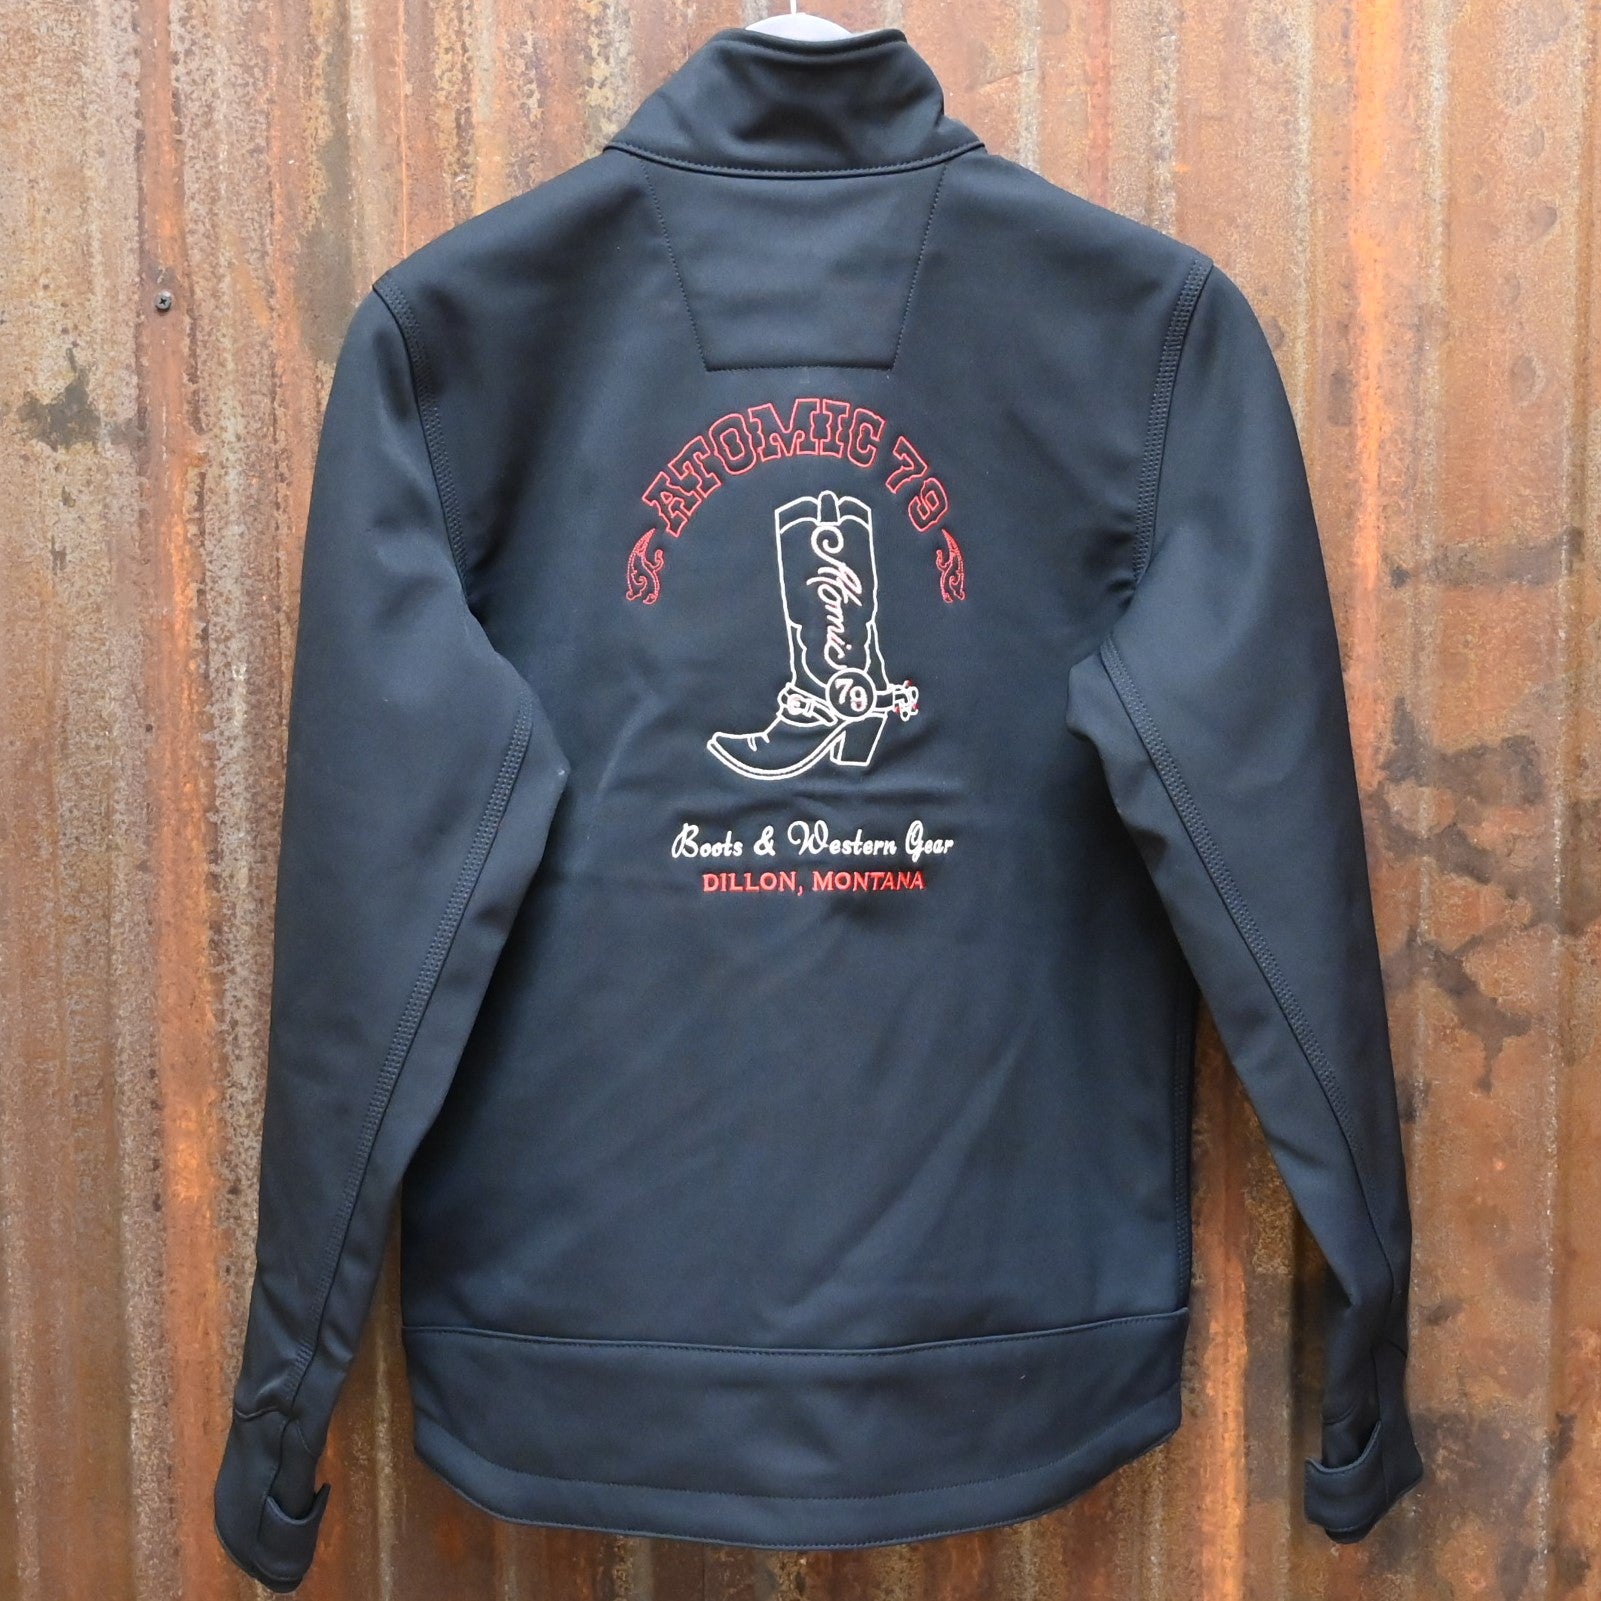 Carhartt Black Crowley Soft Shell w/ Atomic 79 Embroidery on back view of back